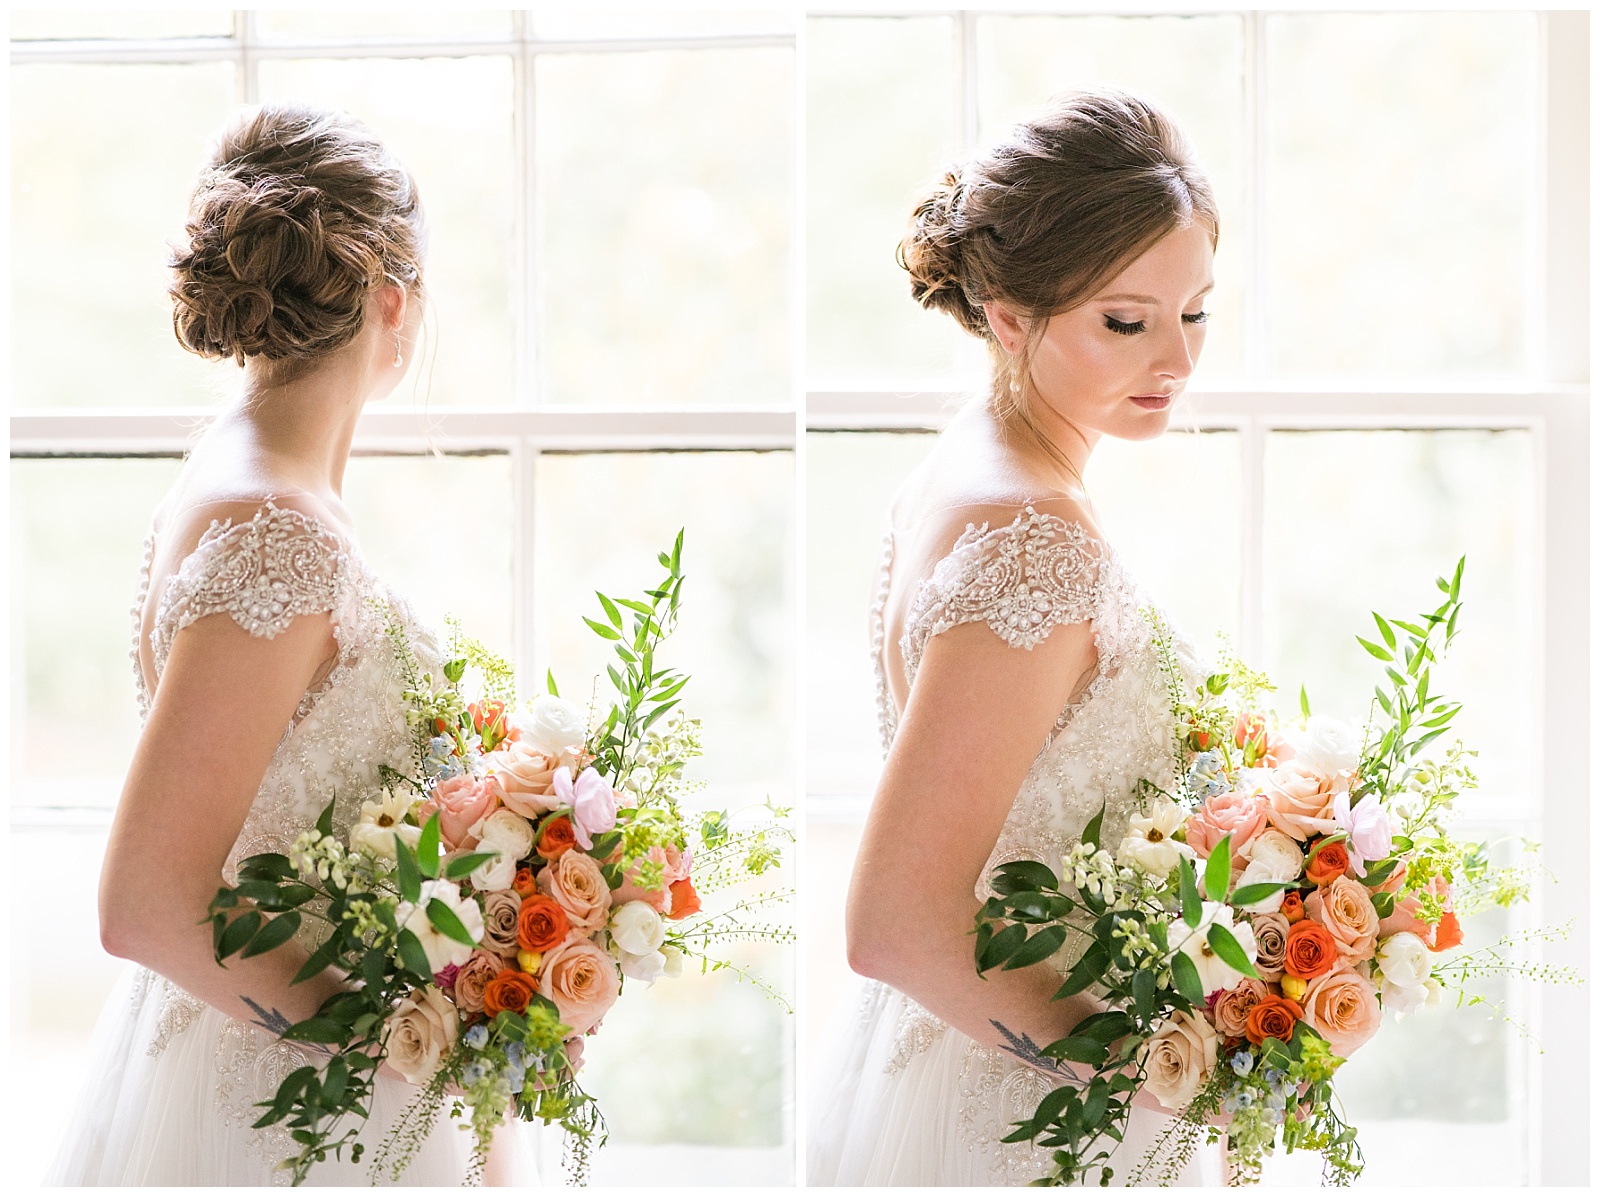 bridal portraits in historic nc venue with huge bridal bouquet by Jenn Eddine Photography